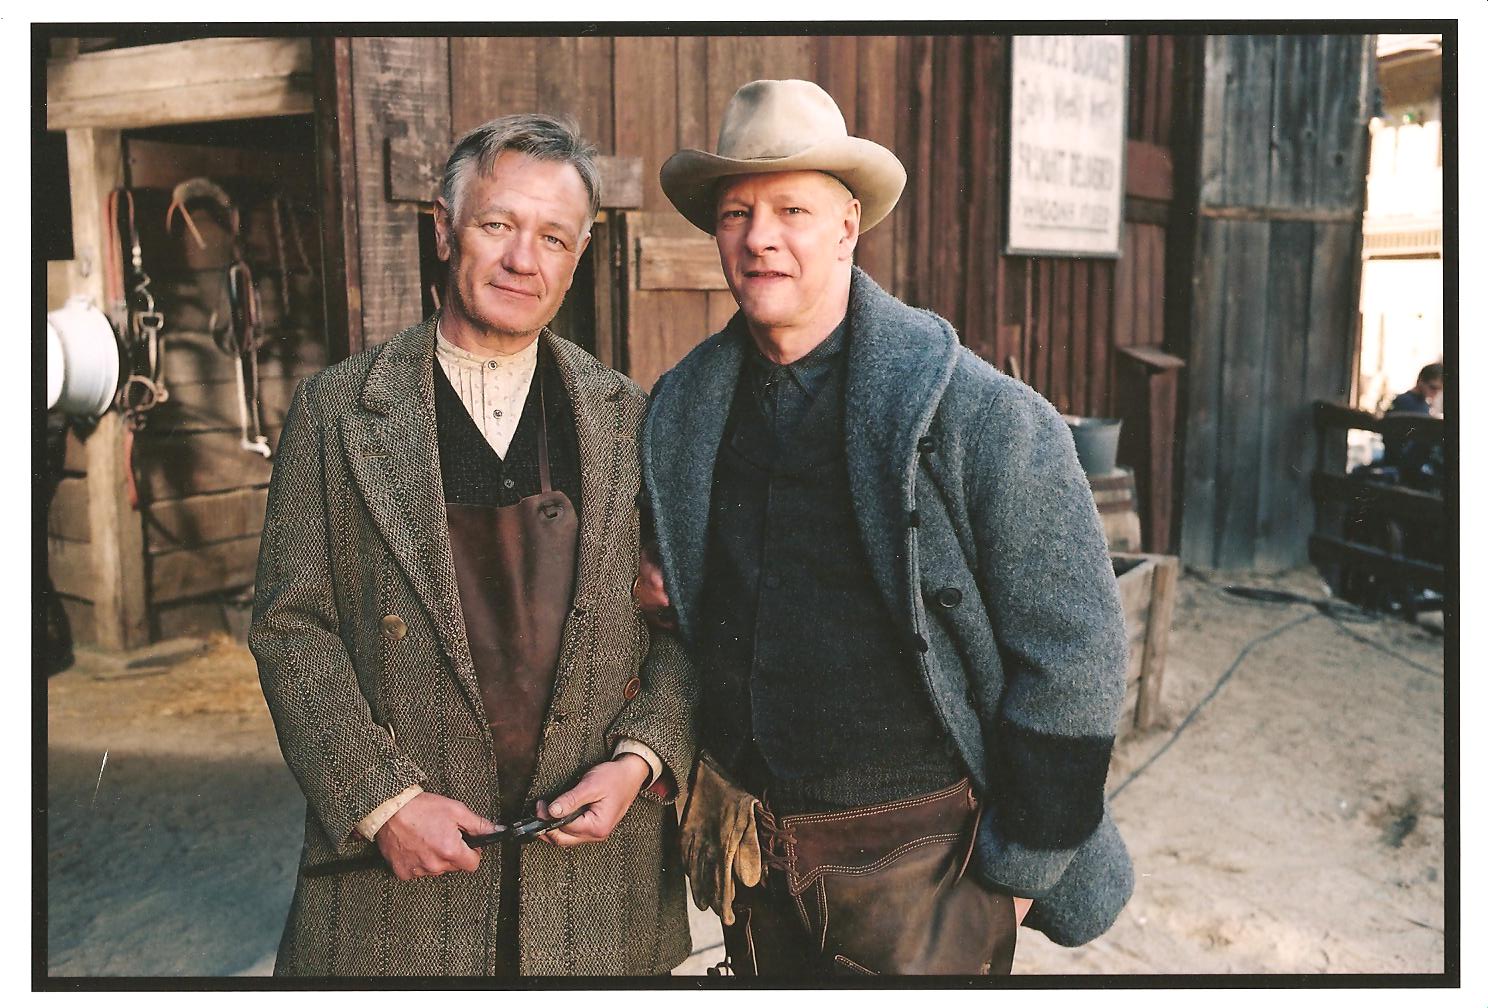 Playing the role of The Blacksmith in Seabiscuit with Chris Cooper, a break between takes. 2002